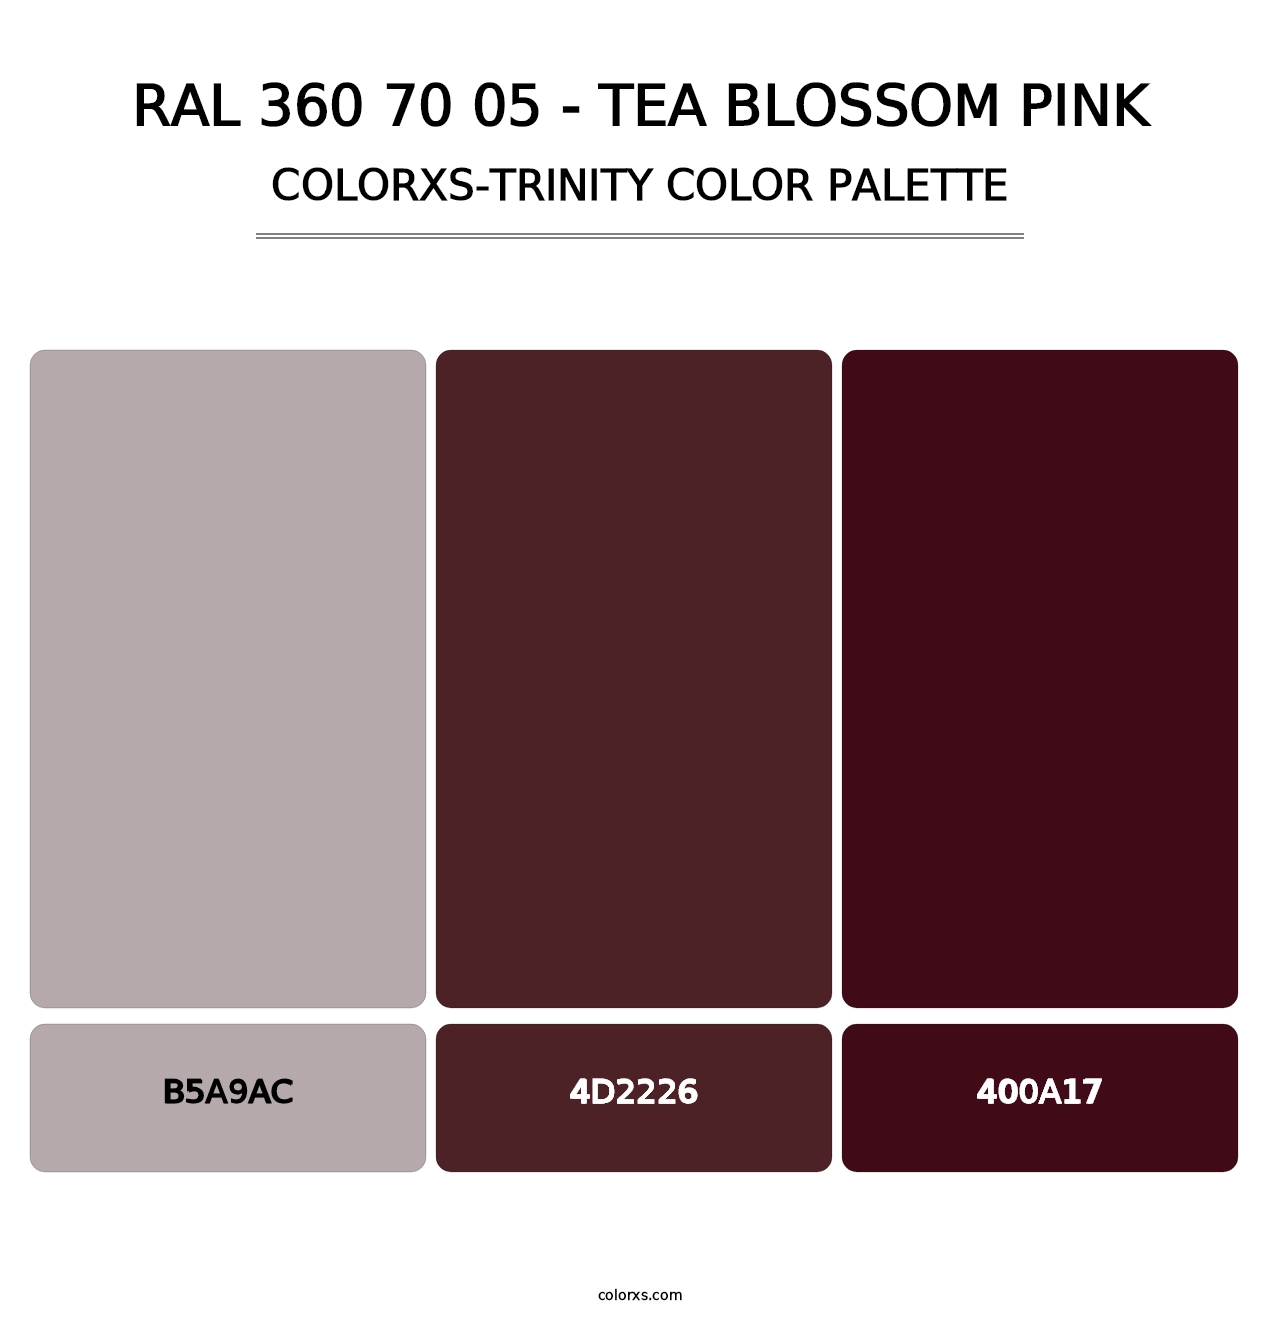 RAL 360 70 05 - Tea Blossom Pink - Colorxs Trinity Palette